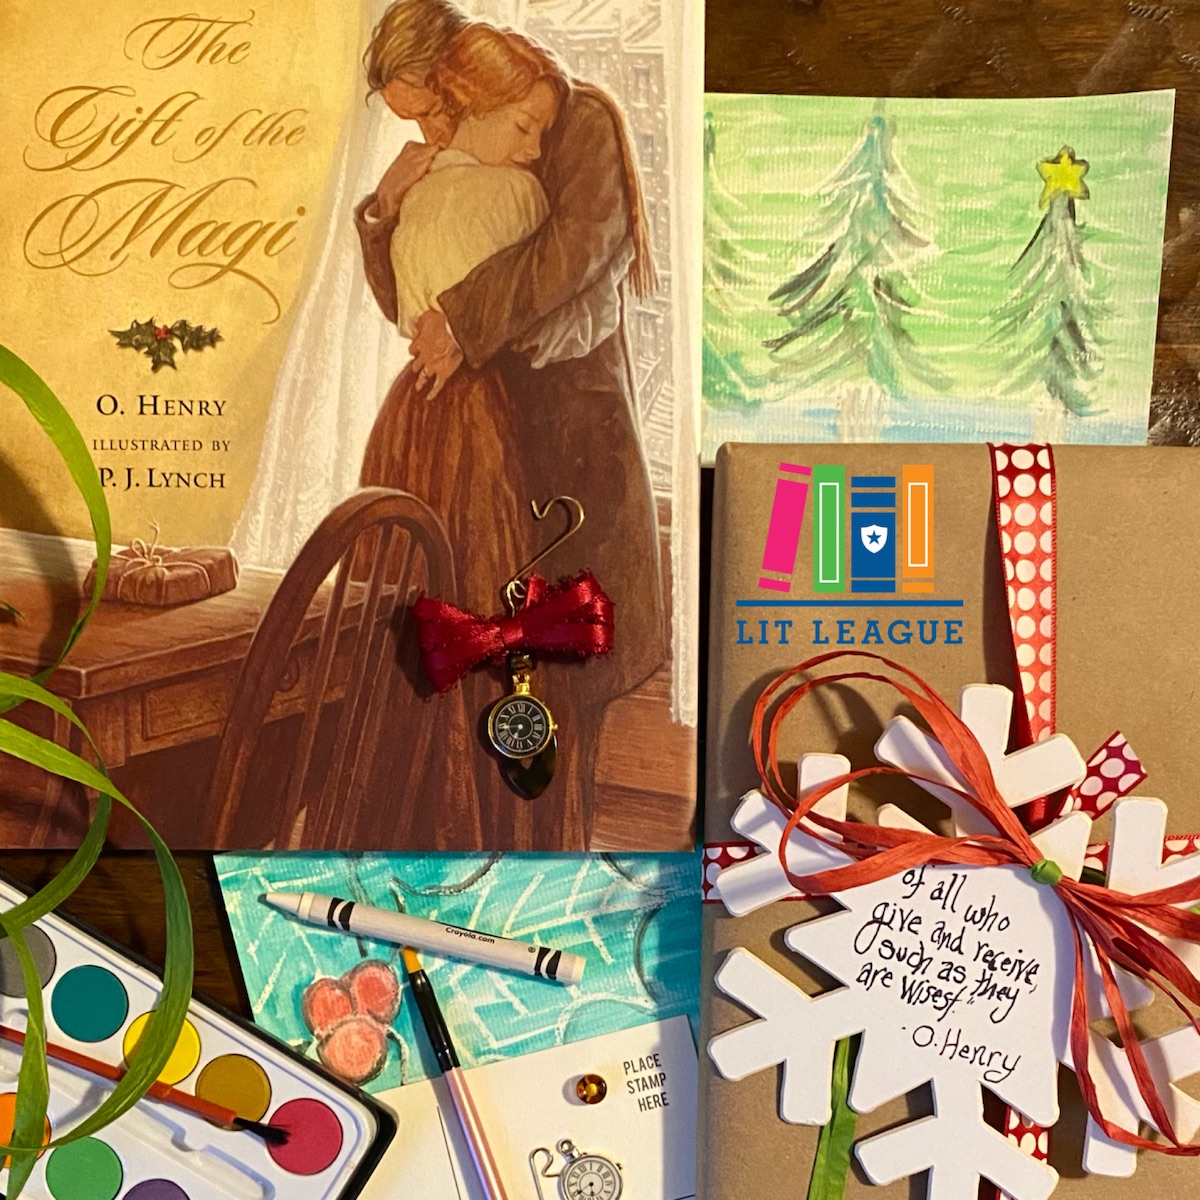 Christmas Activity Box: The Gift of the Magi – Lit League